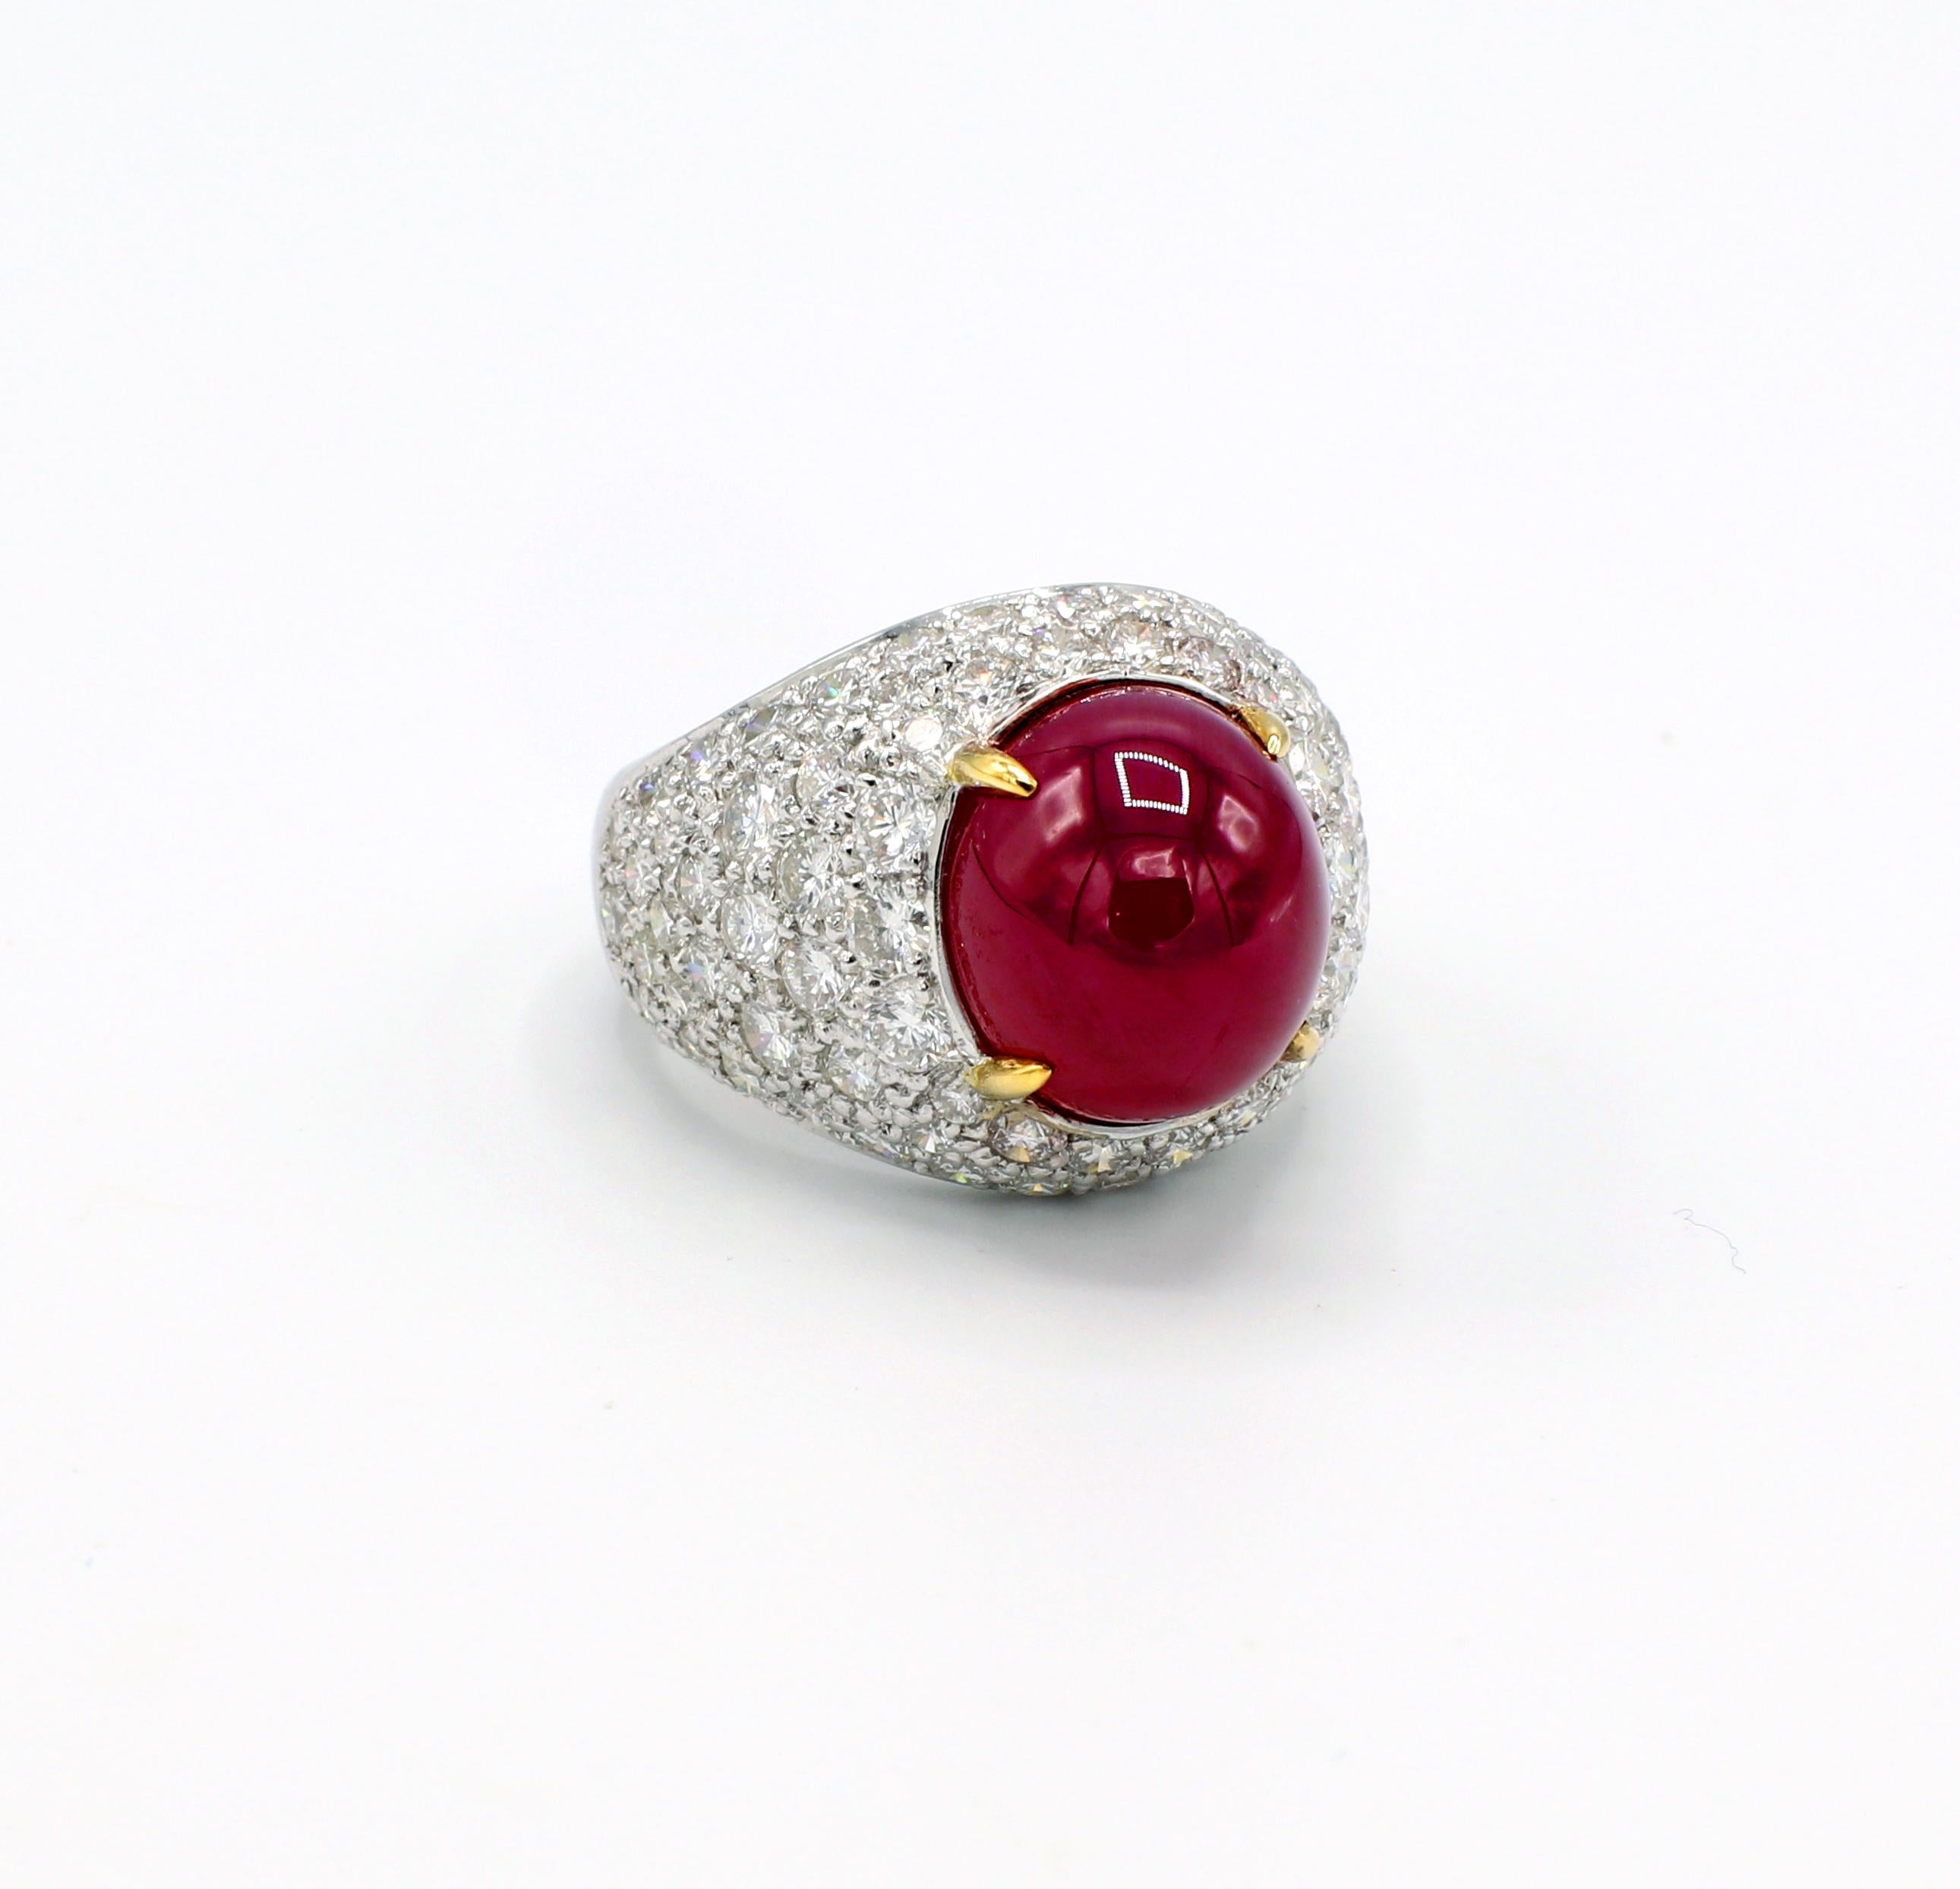 GIA Certified 18K Pave Diamond Cabochon Ruby Dome Cocktail Ring Size 7
GIA Report Number: 6214398607 (see GIA report pictured for details)
Metal: 18k white/yellow gold
Weight: 13.95 grams
Diamonds: Approx. 4 CTW round brilliant cut diamonds G VS